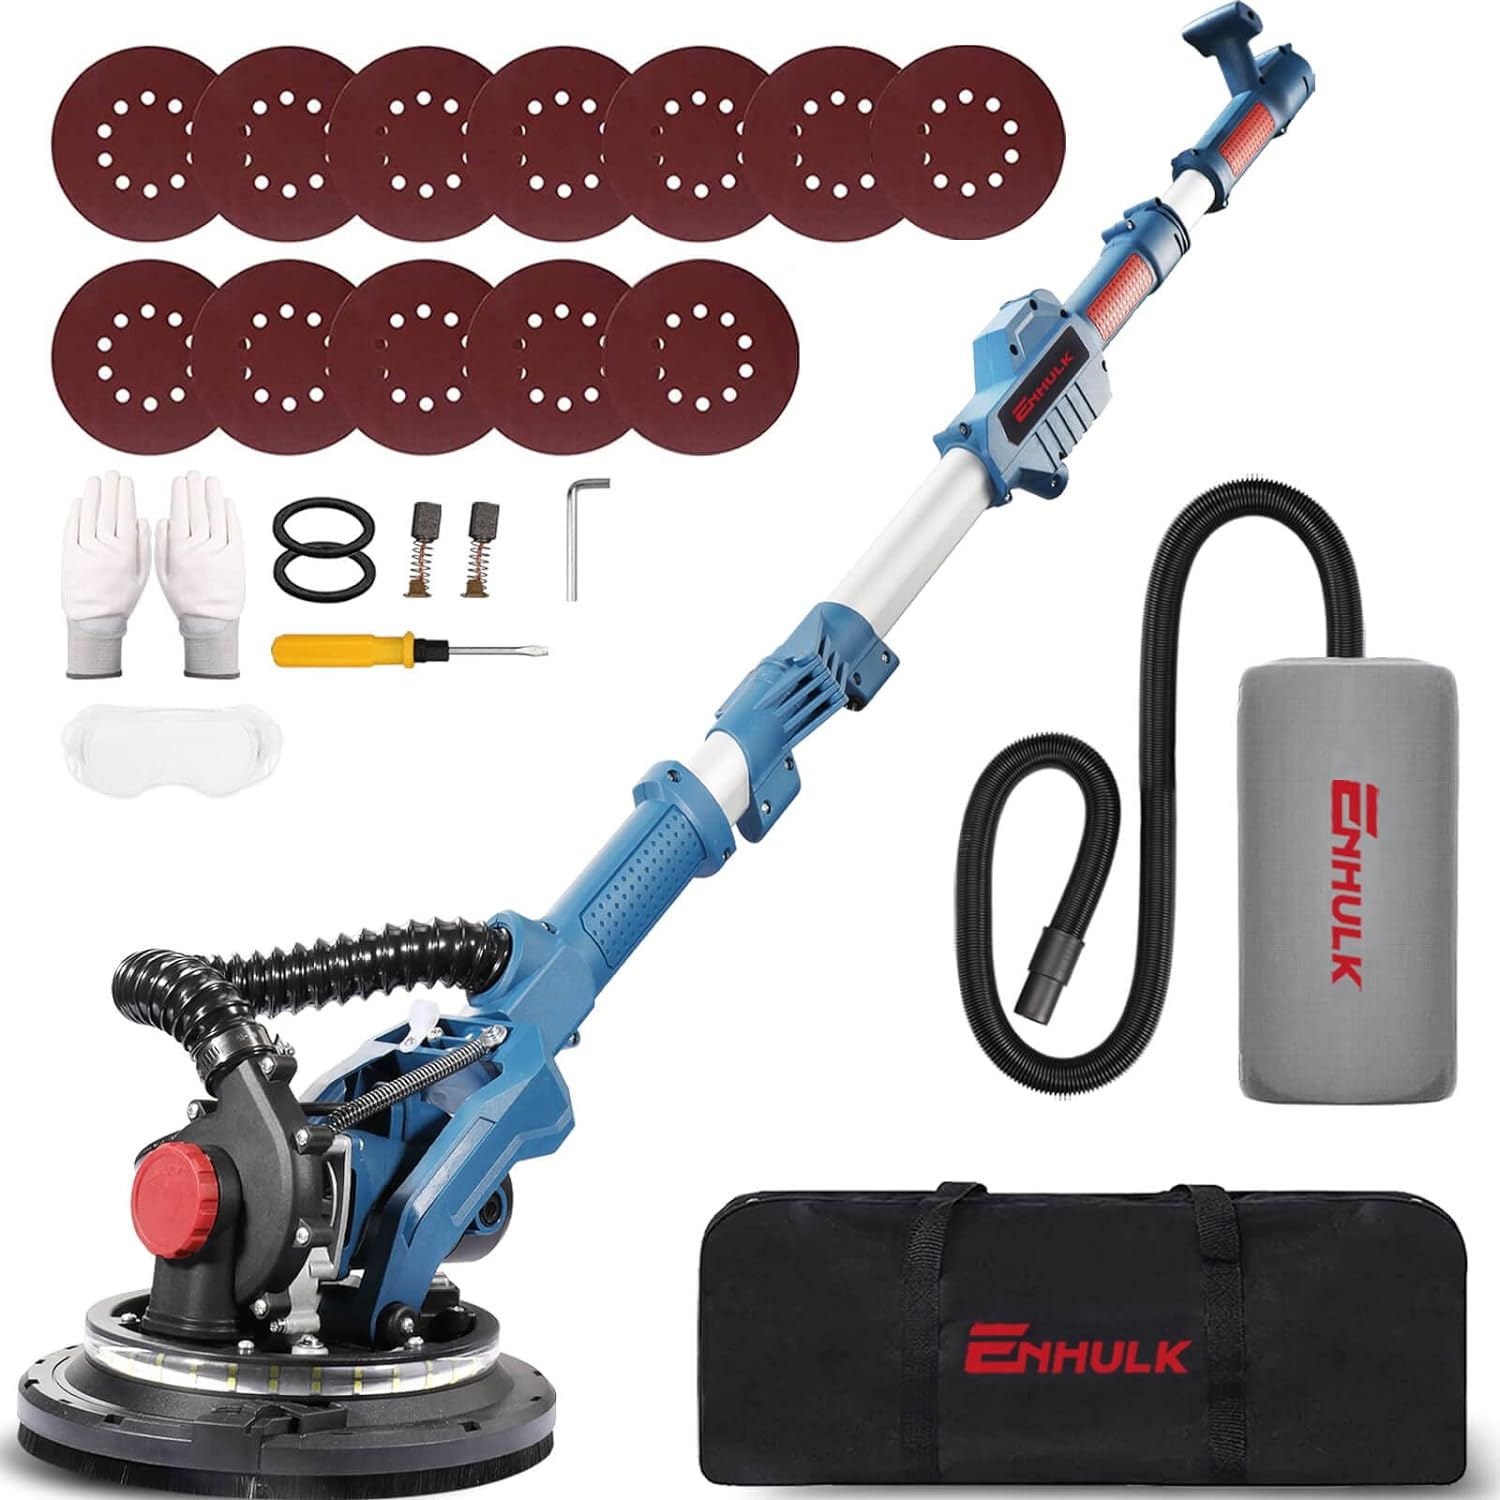 Enhulk Drywall Sander, 900W 7.2A Electric Drywall Sander with Vacuum Auto Dust Collection, 6 Variable Speed 800-1800RPM, Double-Deck LED Lights, Extendable  Foldable Handle, 12 Sanding Discs